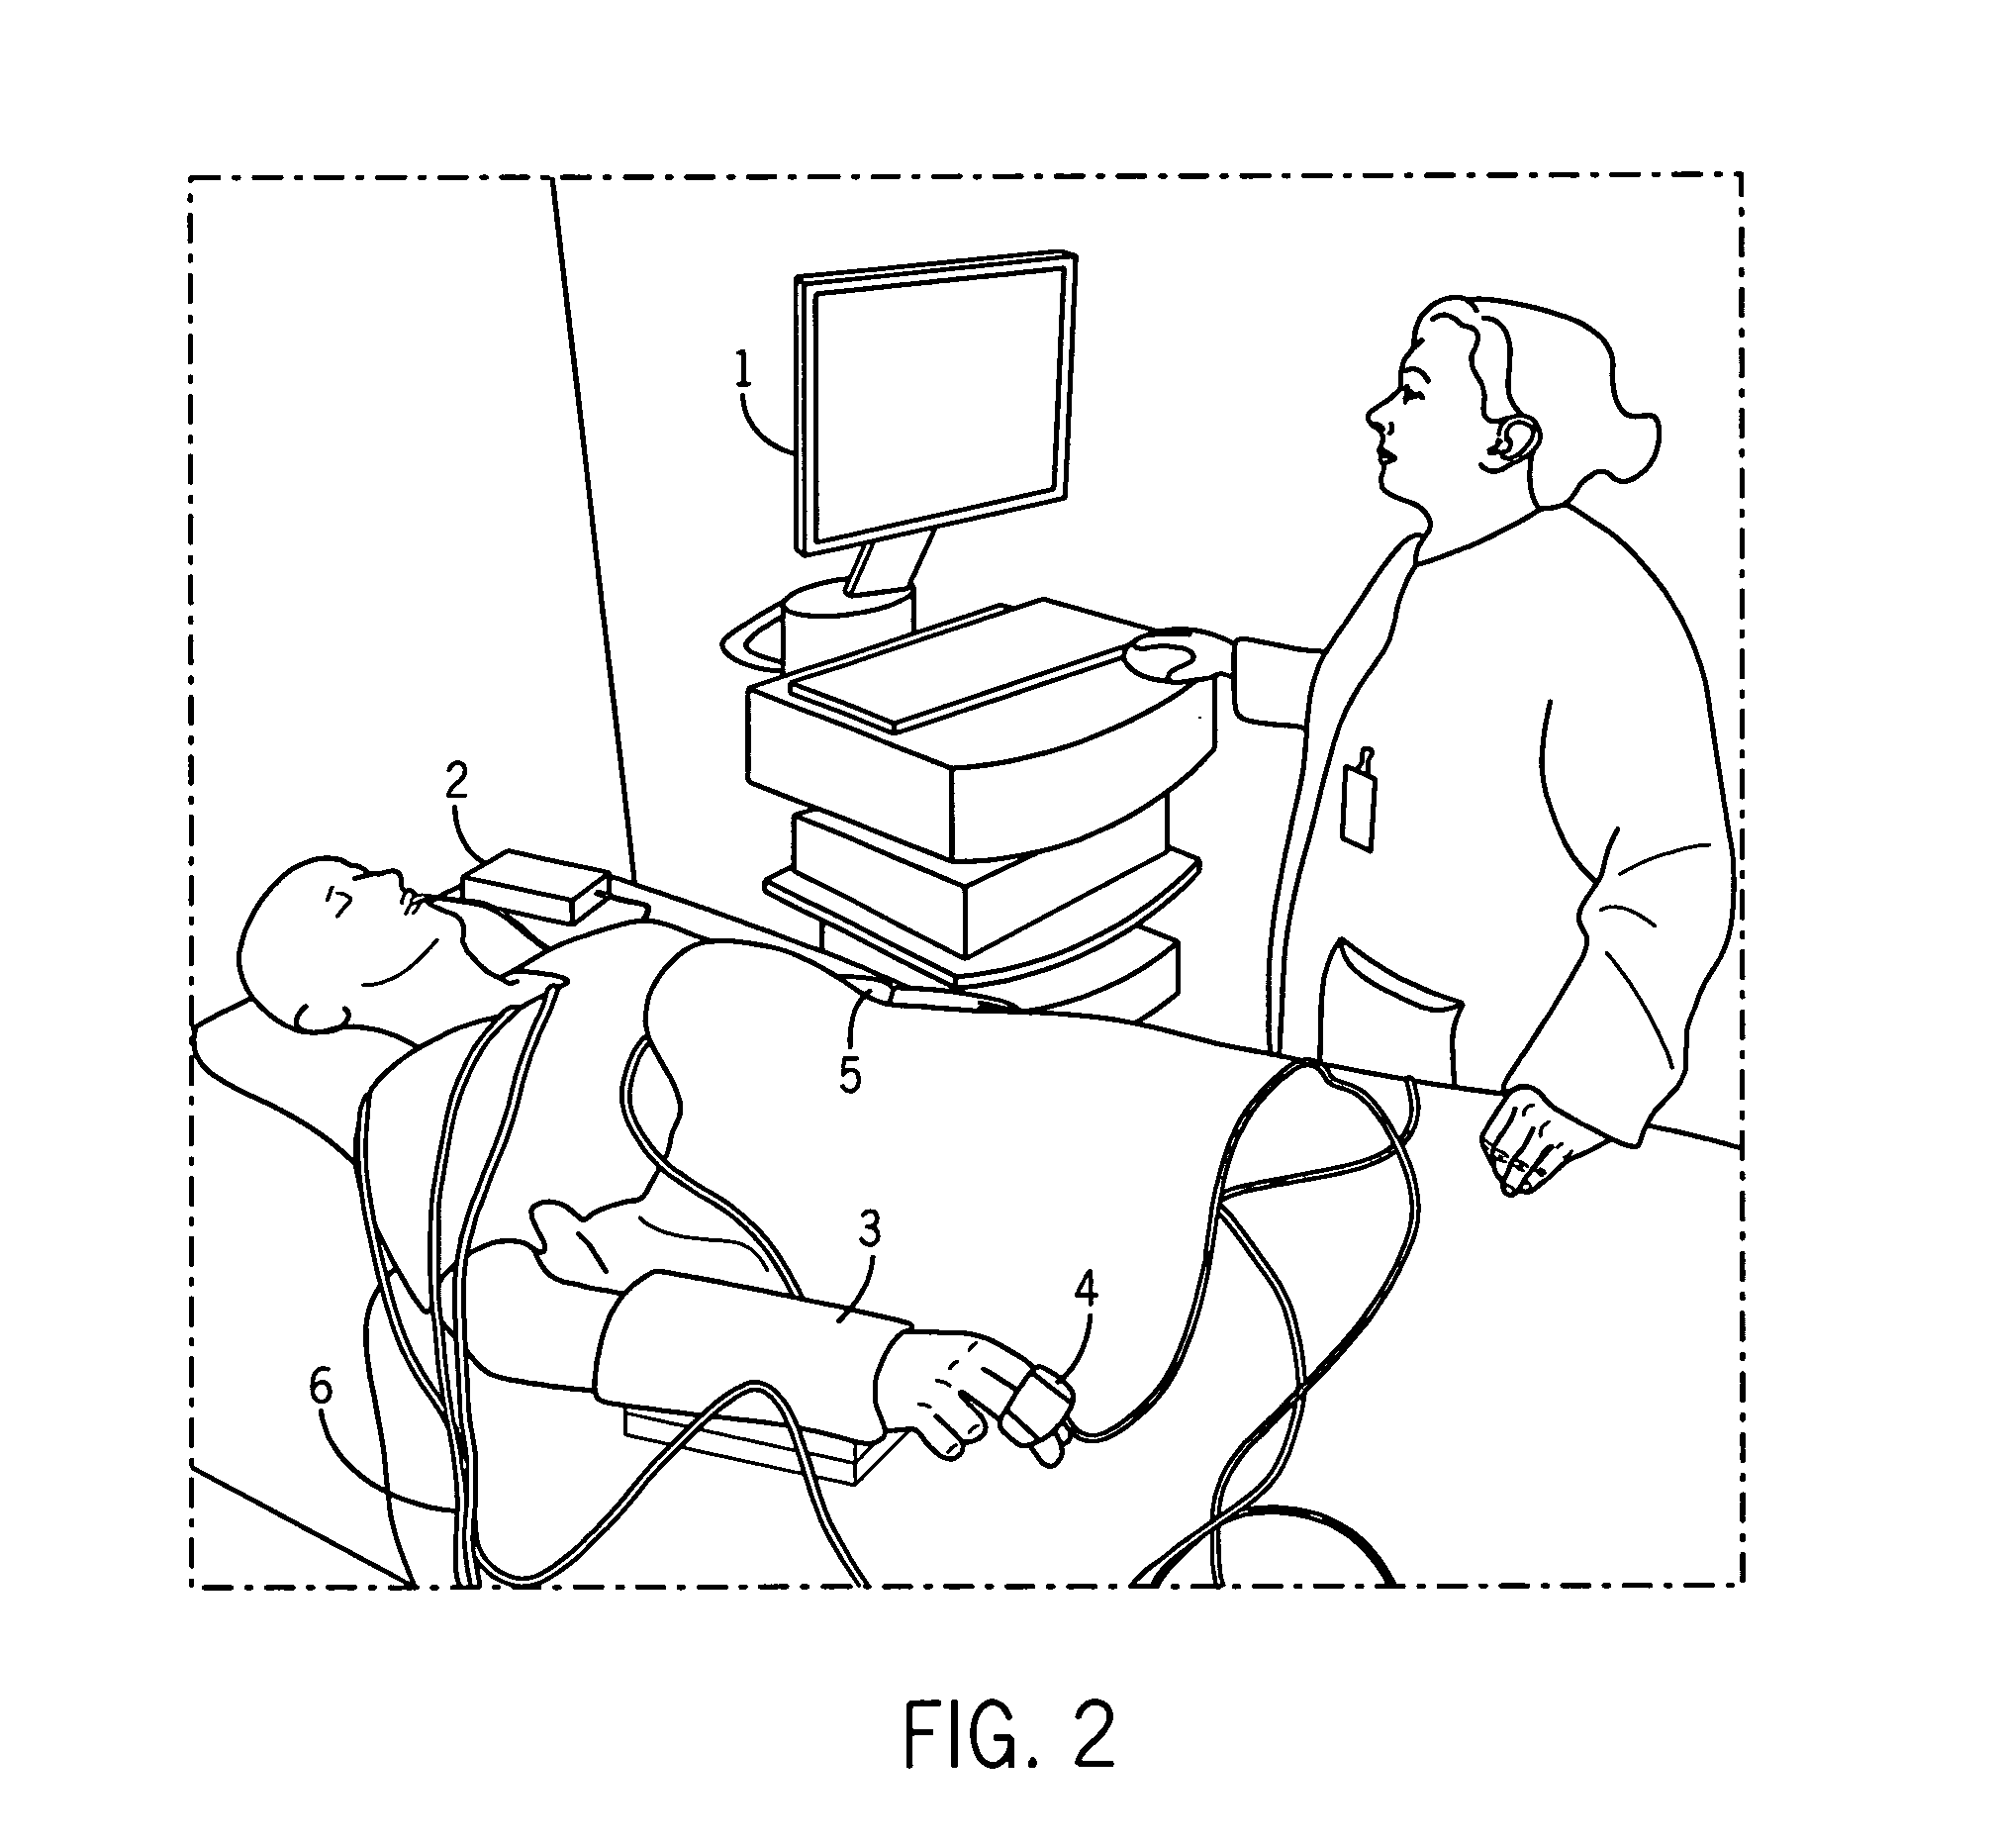 Hemodynamic parameter (Hdp) monitoring system for diagnosis of a health condition of a patient